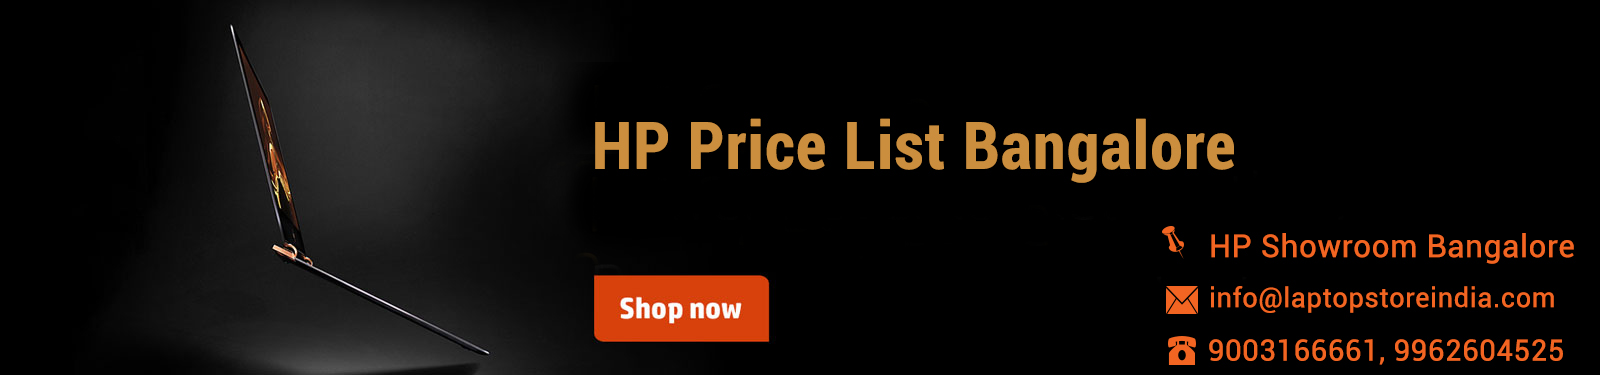 HP Price List in Bangalore, hp price list, hp laptop price, hp price in india